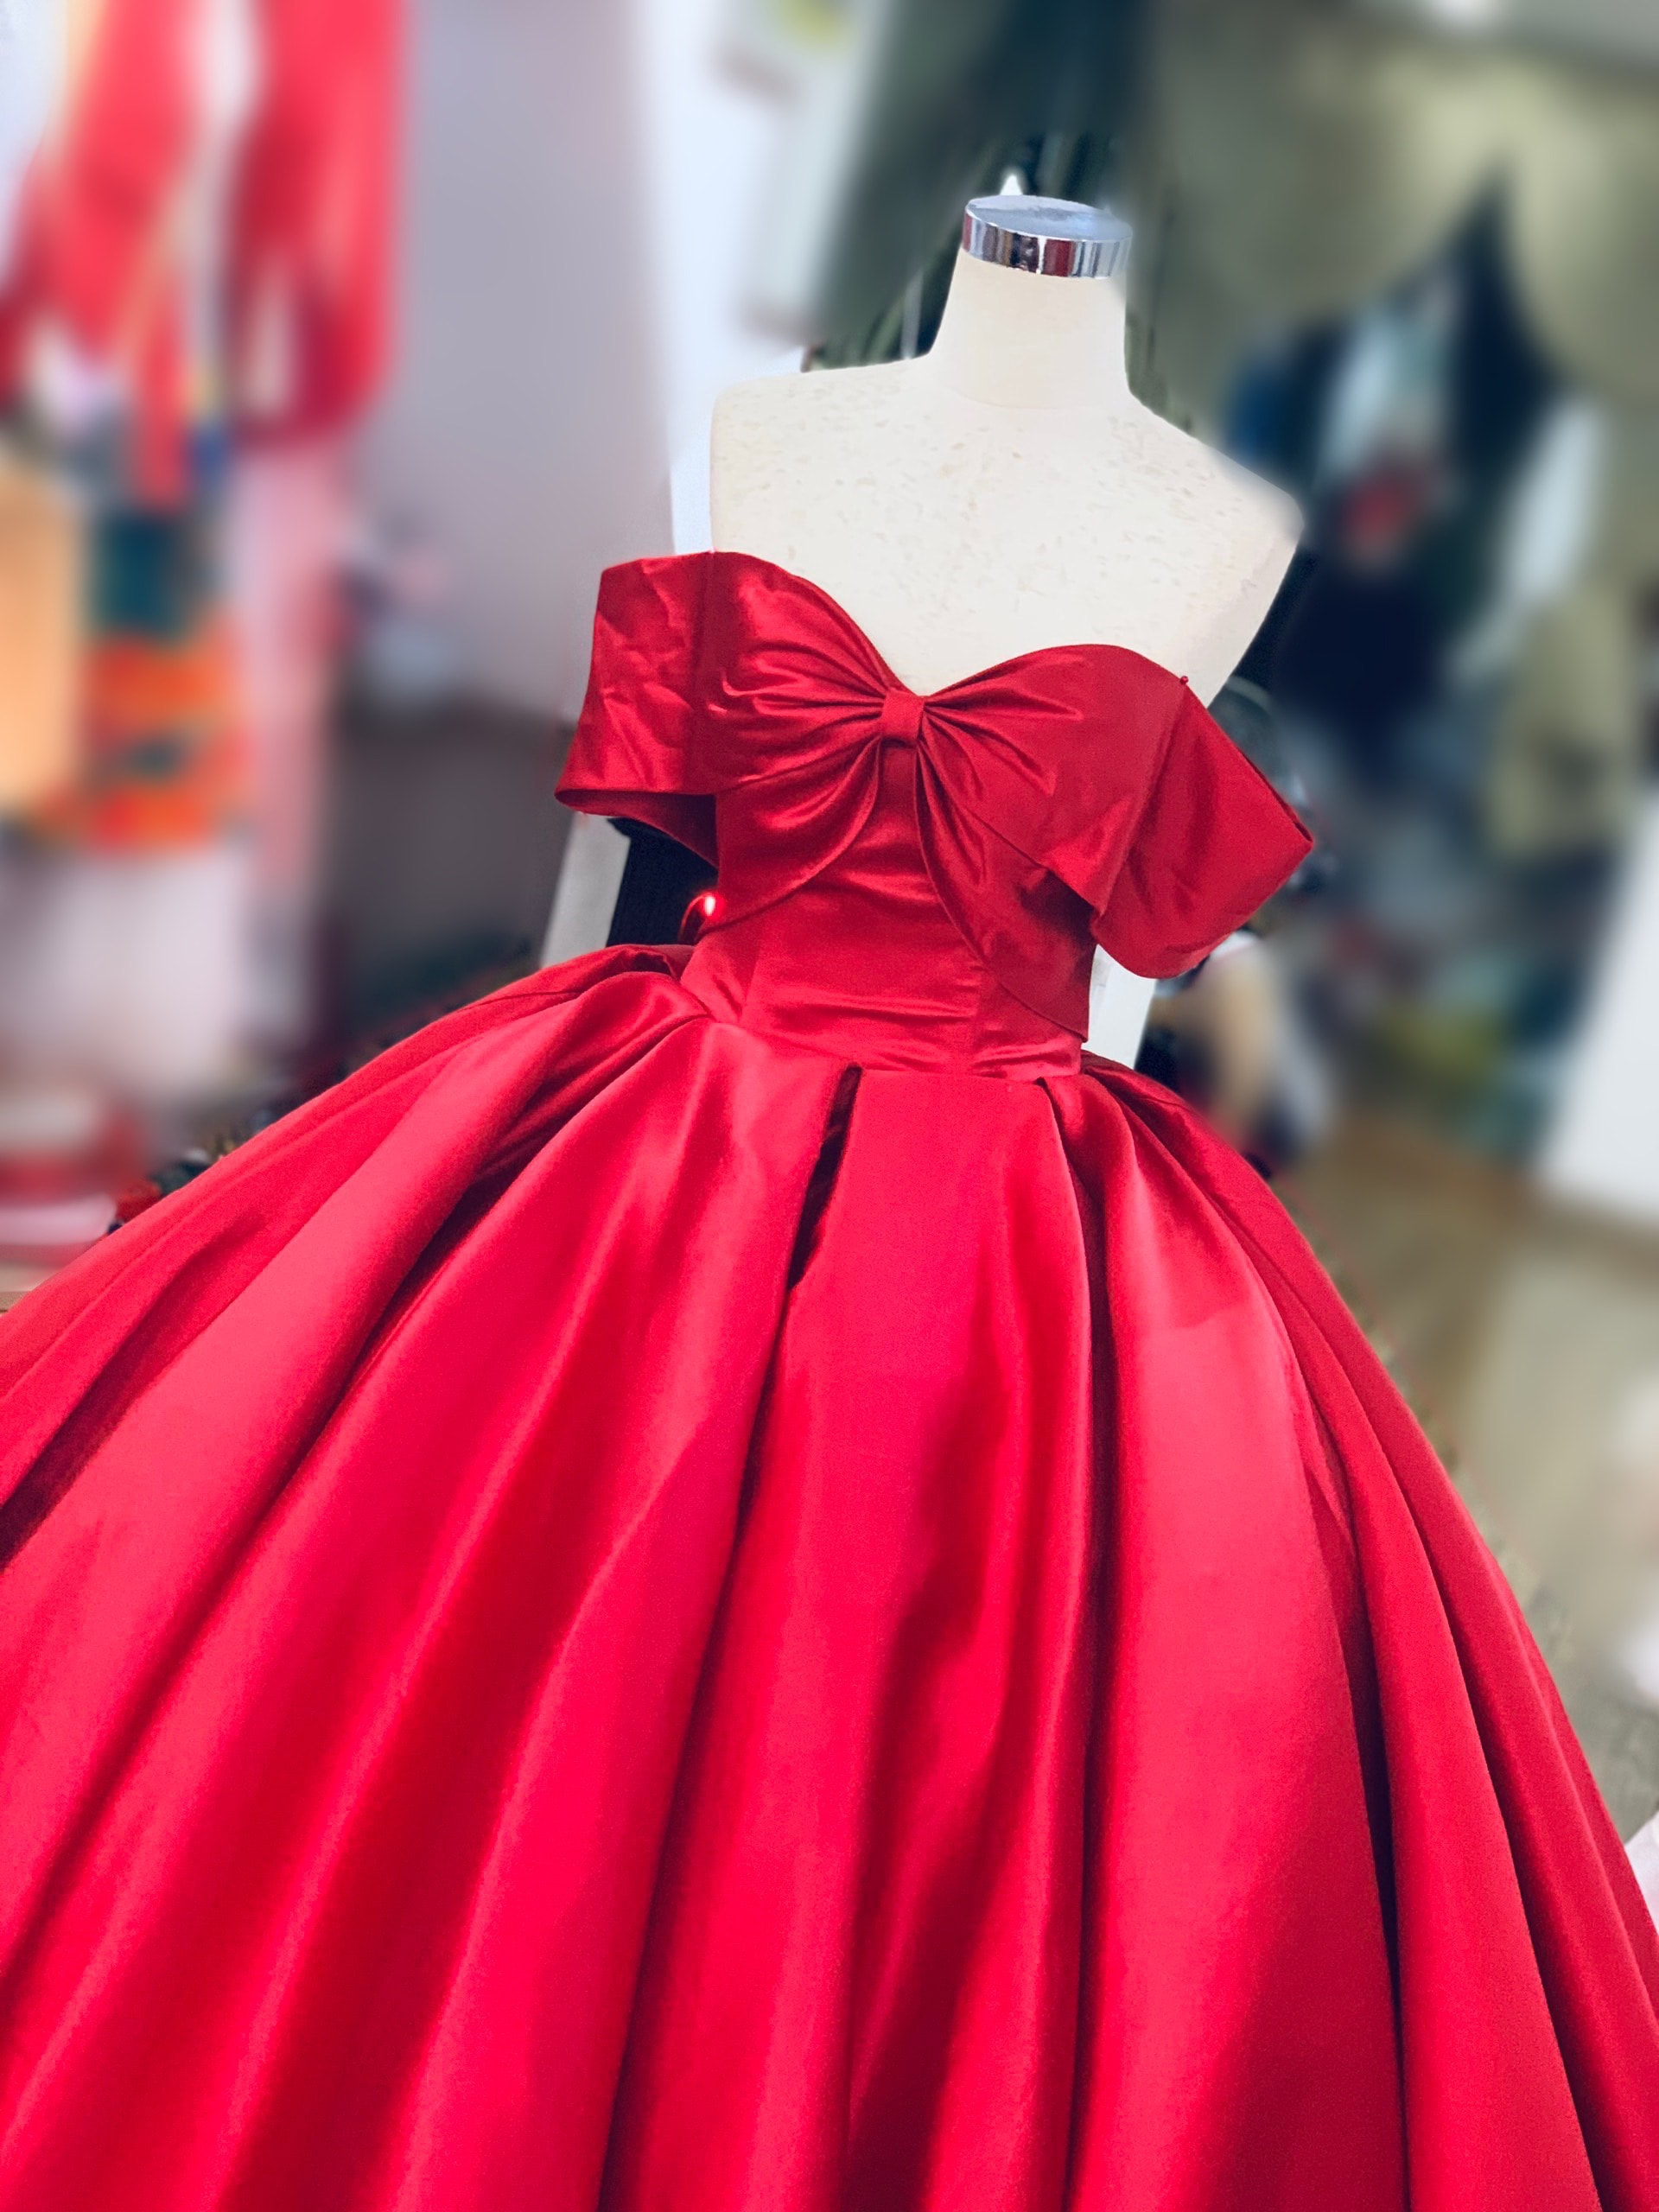 Red Prom Dresses for sale in Makati | Facebook Marketplace | Facebook